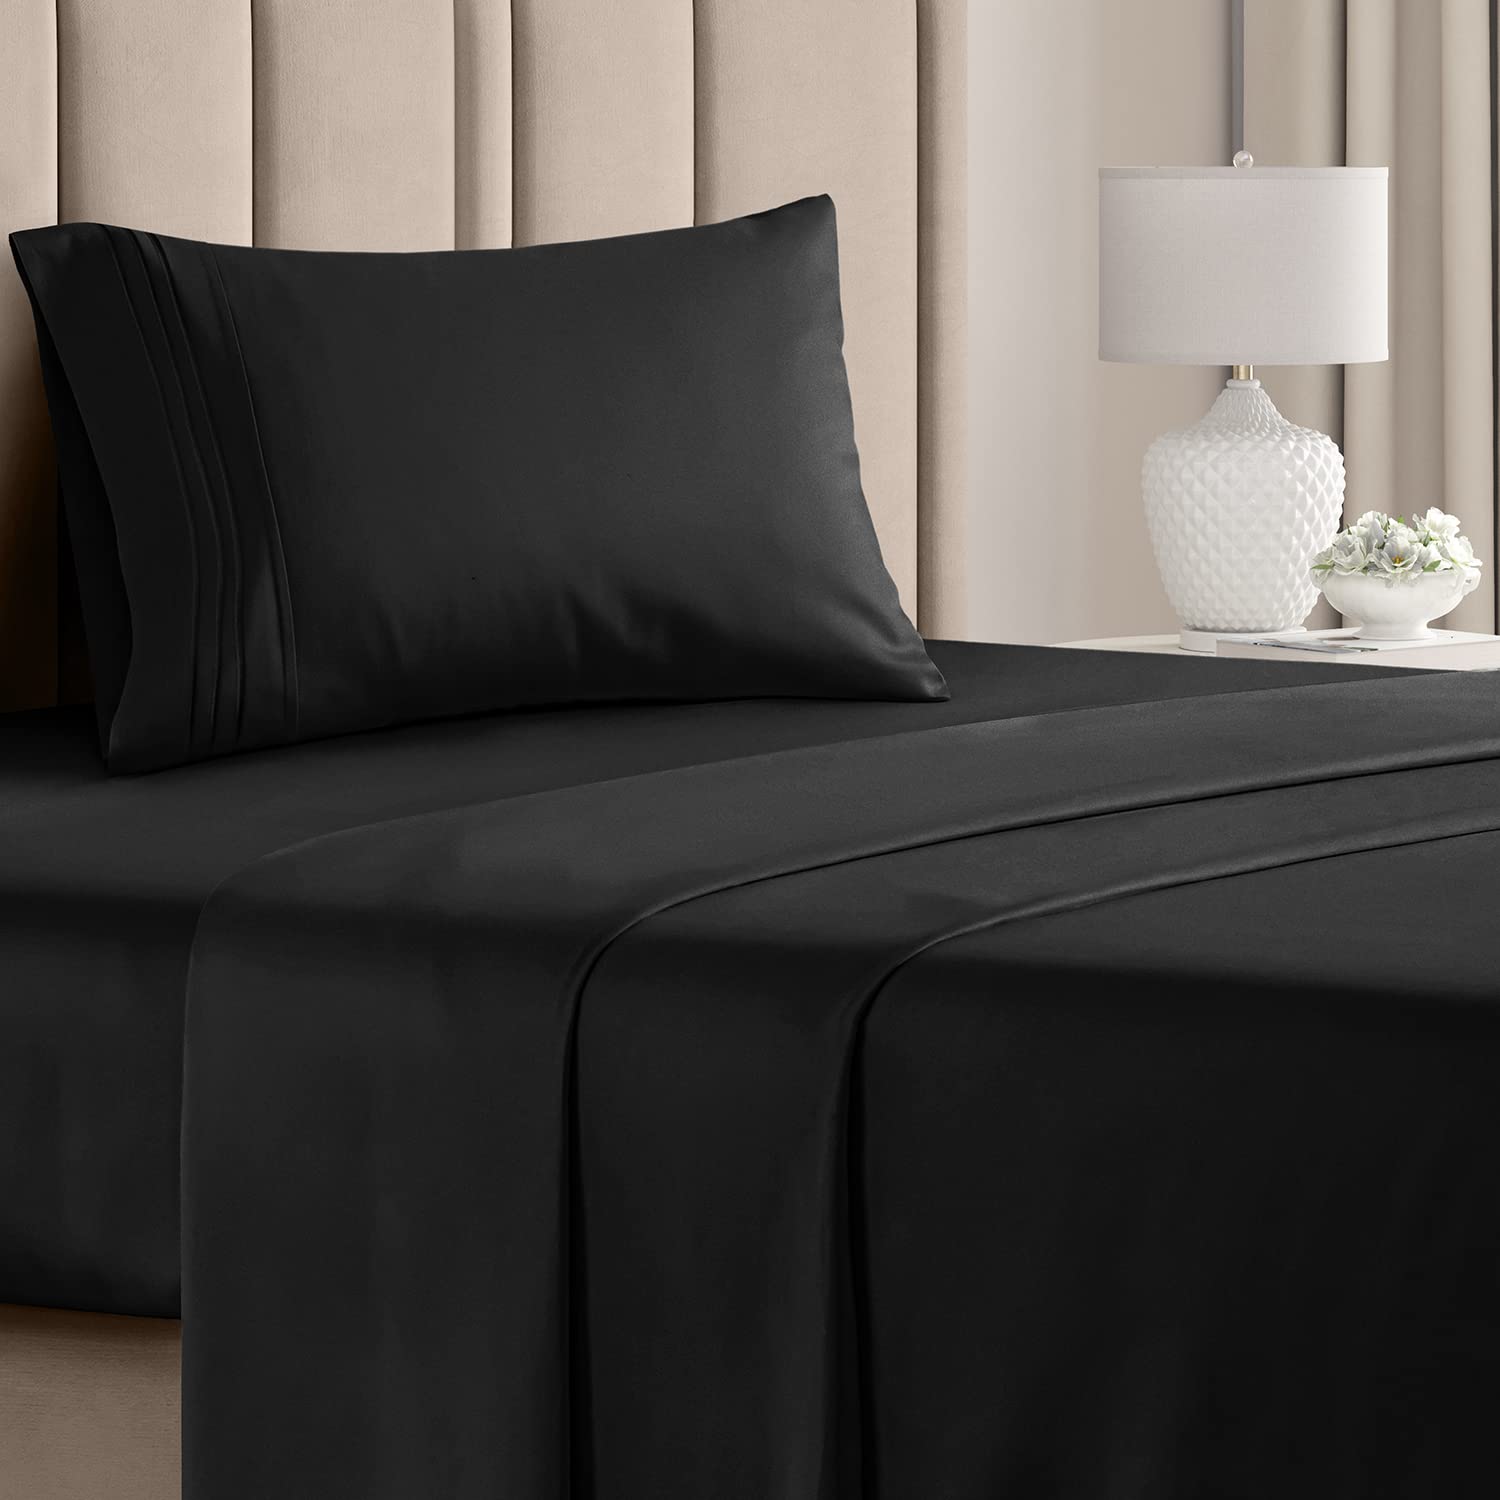 Book Cover Twin XL Sheet Set - Breathable & Cooling - College Dorm Room Bed Sheets - Hotel Luxury Bed Sheets - Extra Soft Sheets - Deep Pockets - Easy Fit - 3 Piece Set - Bed Sheets - Twin - Twin XL Bed Sheet 24 - Black Twin XL